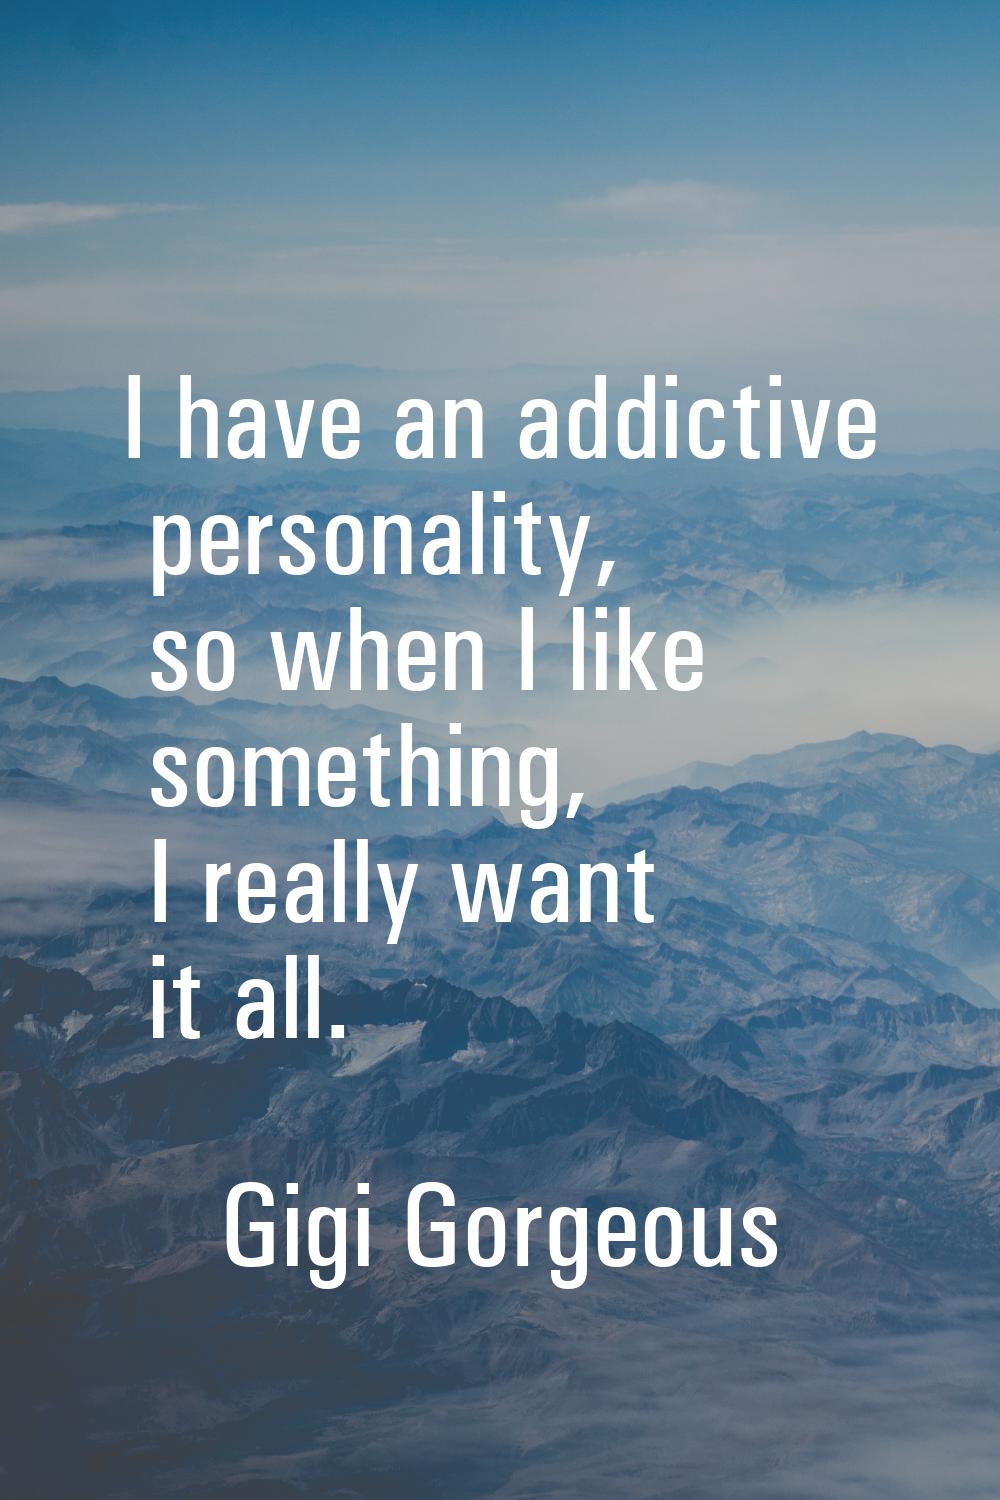 I have an addictive personality, so when I like something, I really want it all.